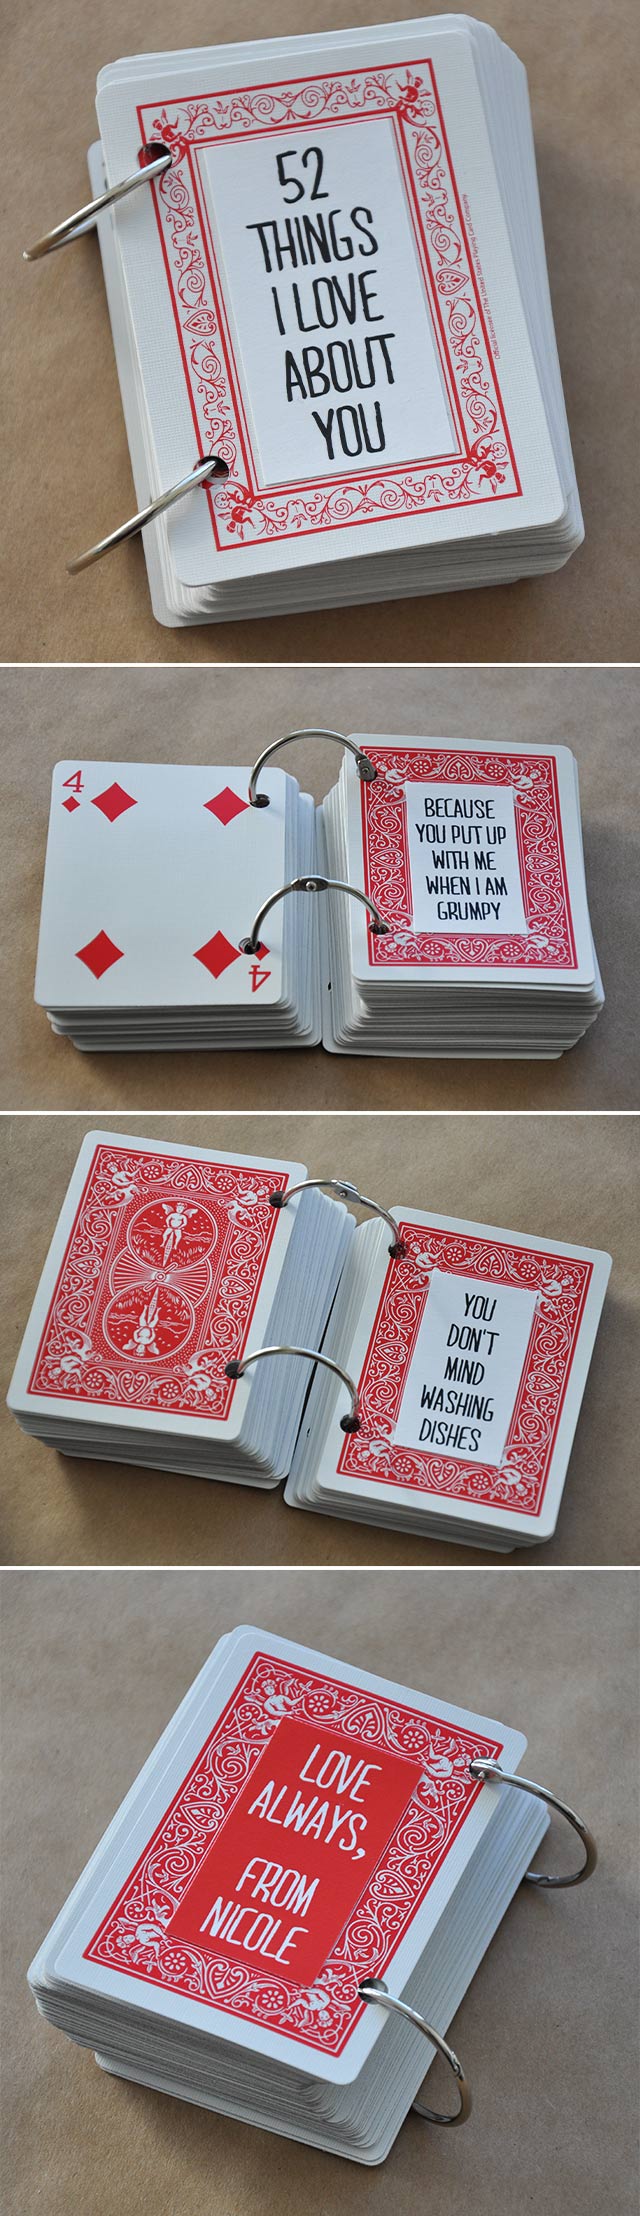 52 Things Card Deck | Homemade Christmas Gifts Men Will Actually Love